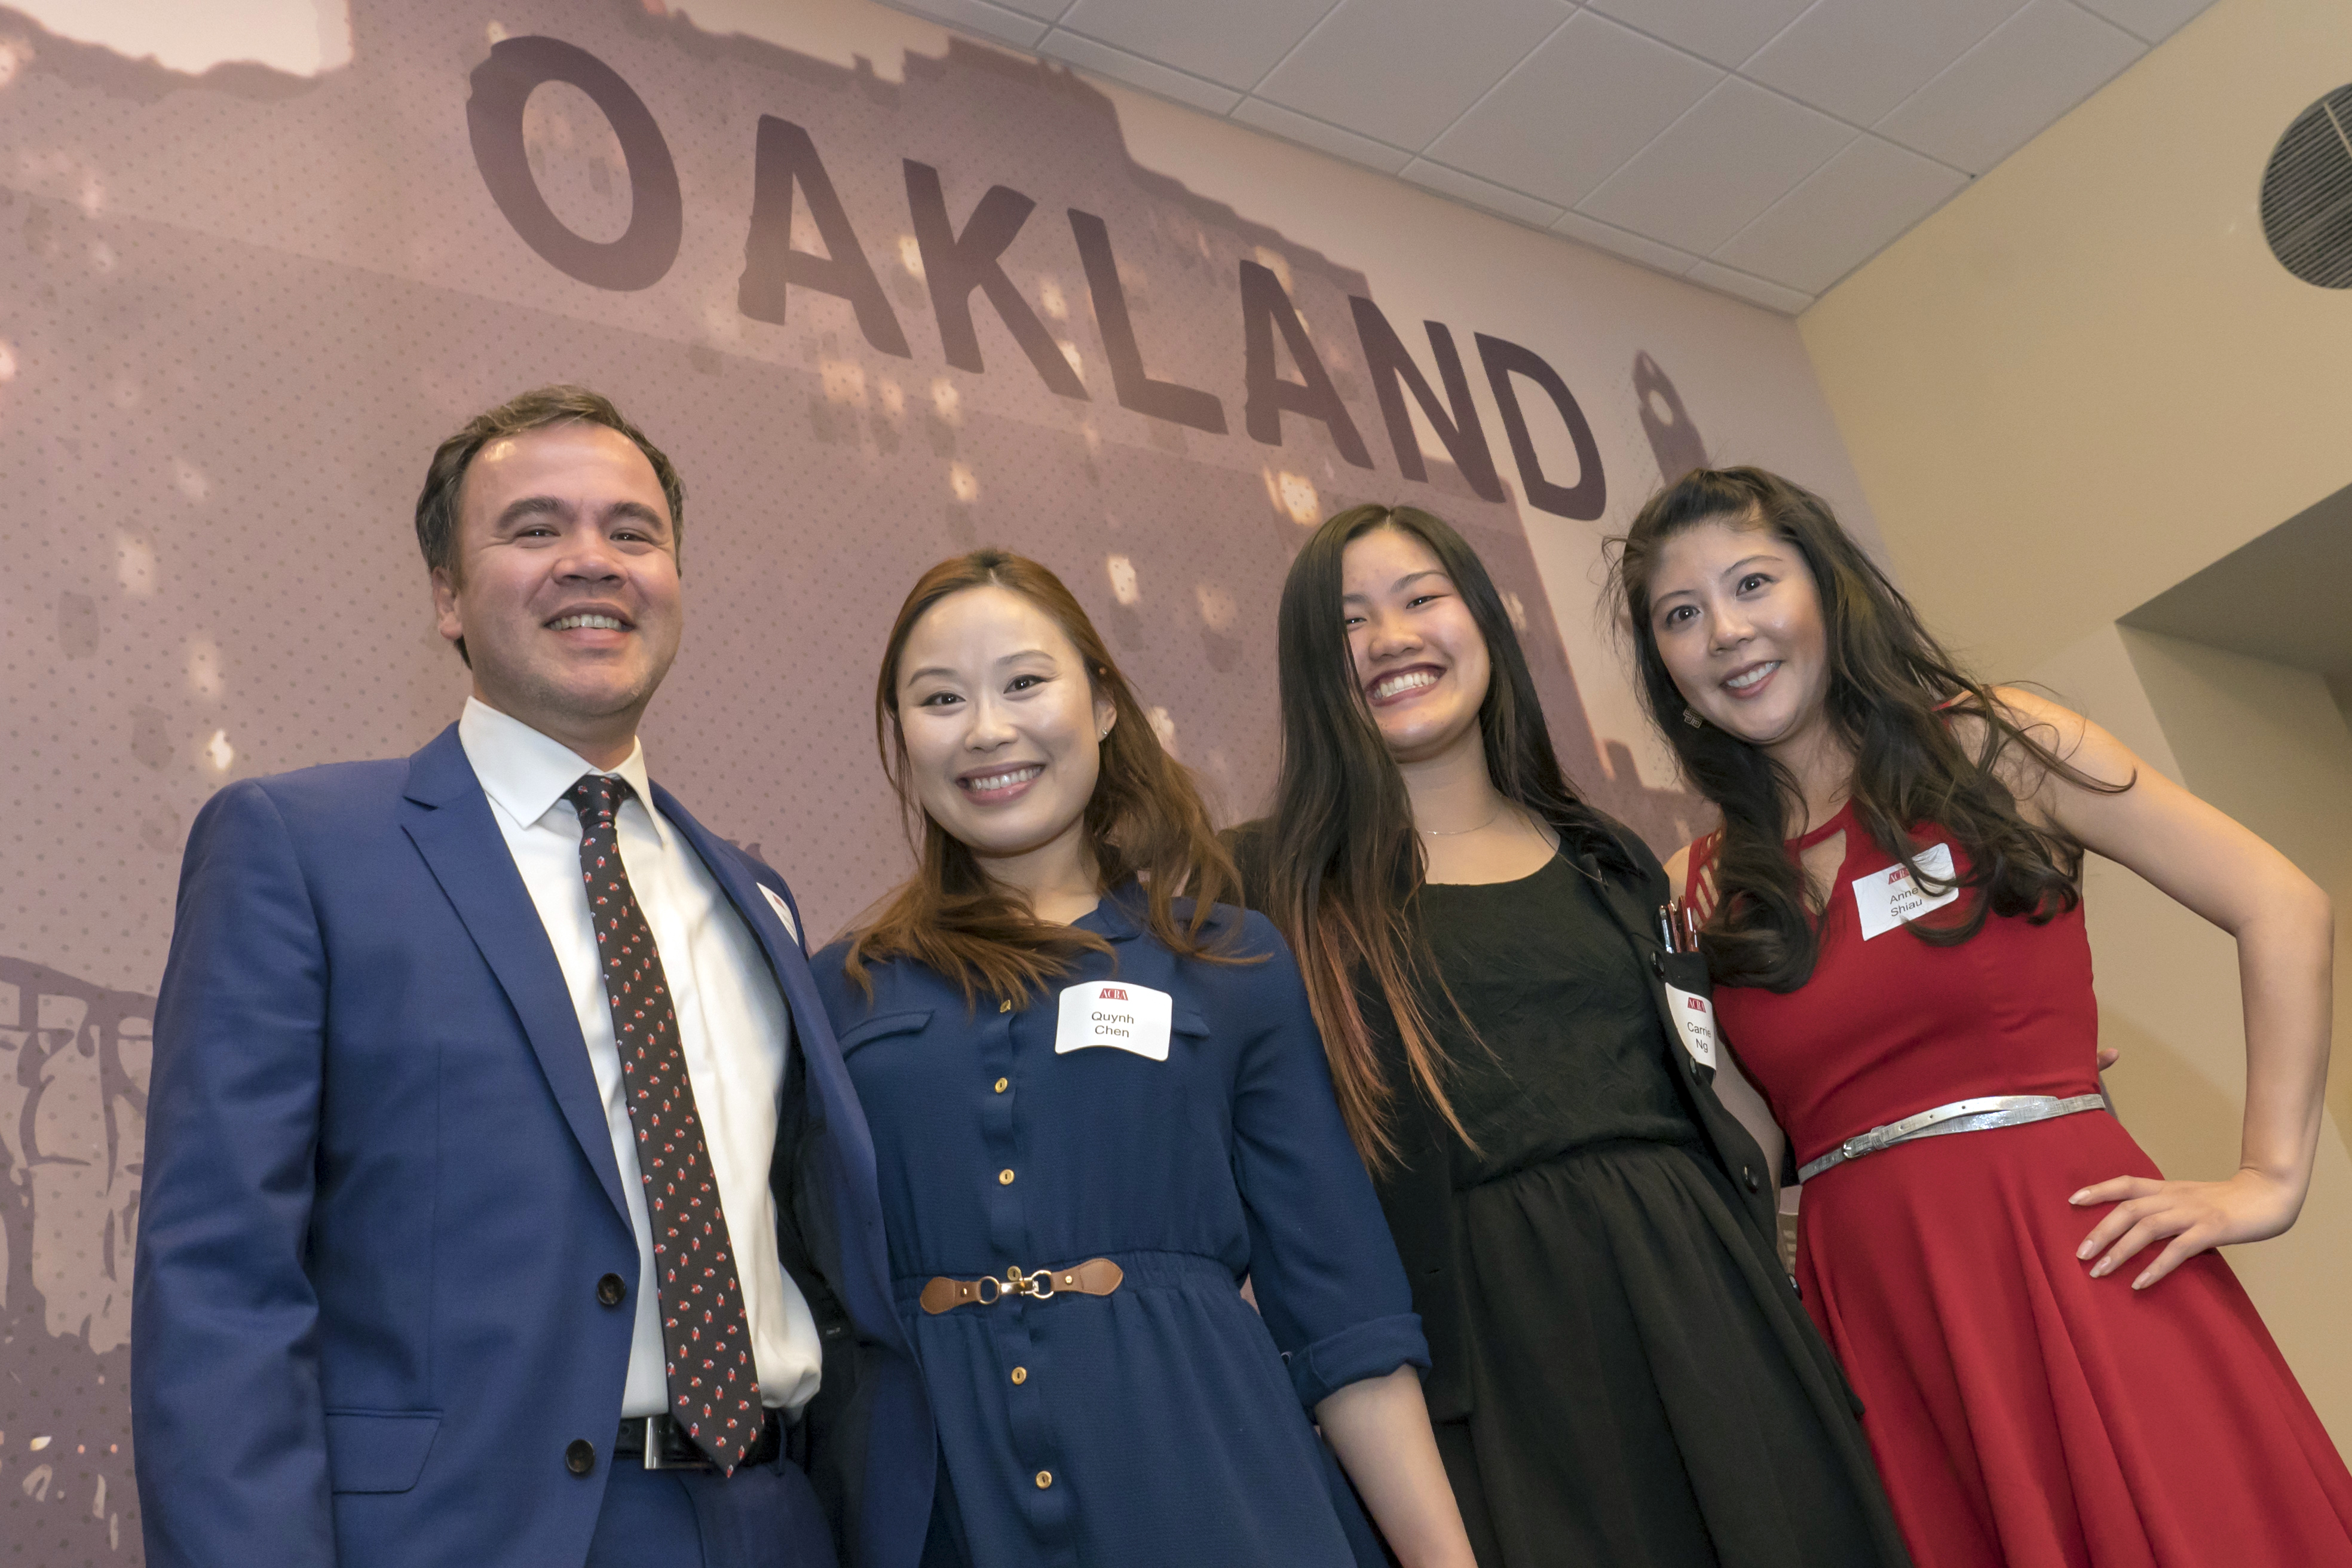 William Walraven, Quynh Chen, Carrie Ng, and Anne Shaiu2